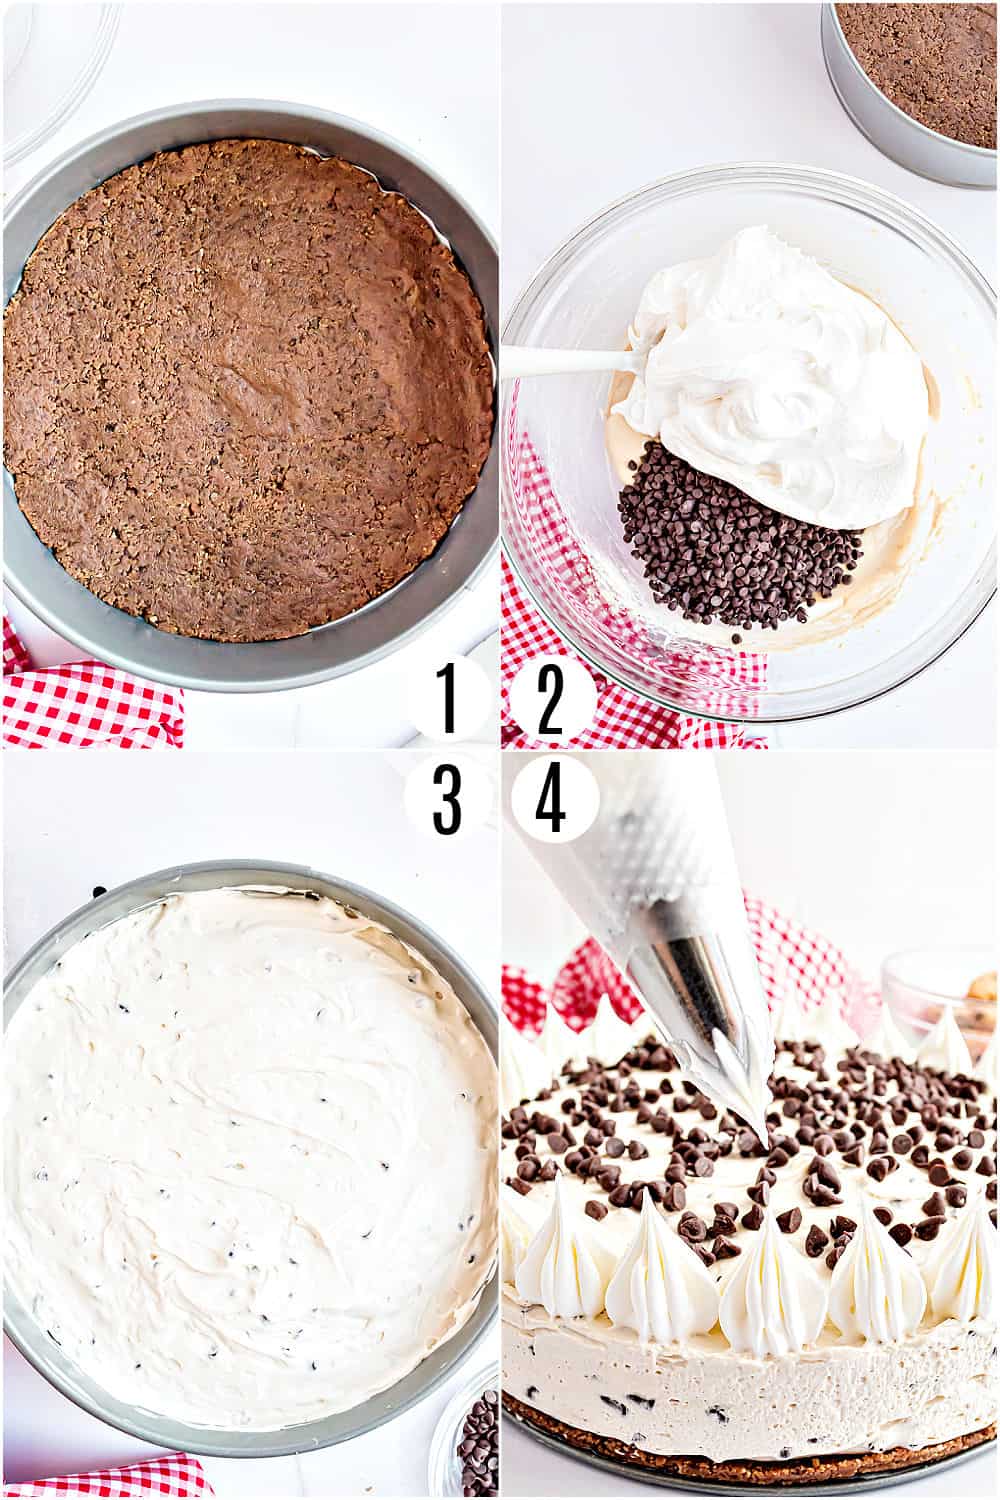 Step by step photos showing how to make chocolate chip cookie cheesecake.